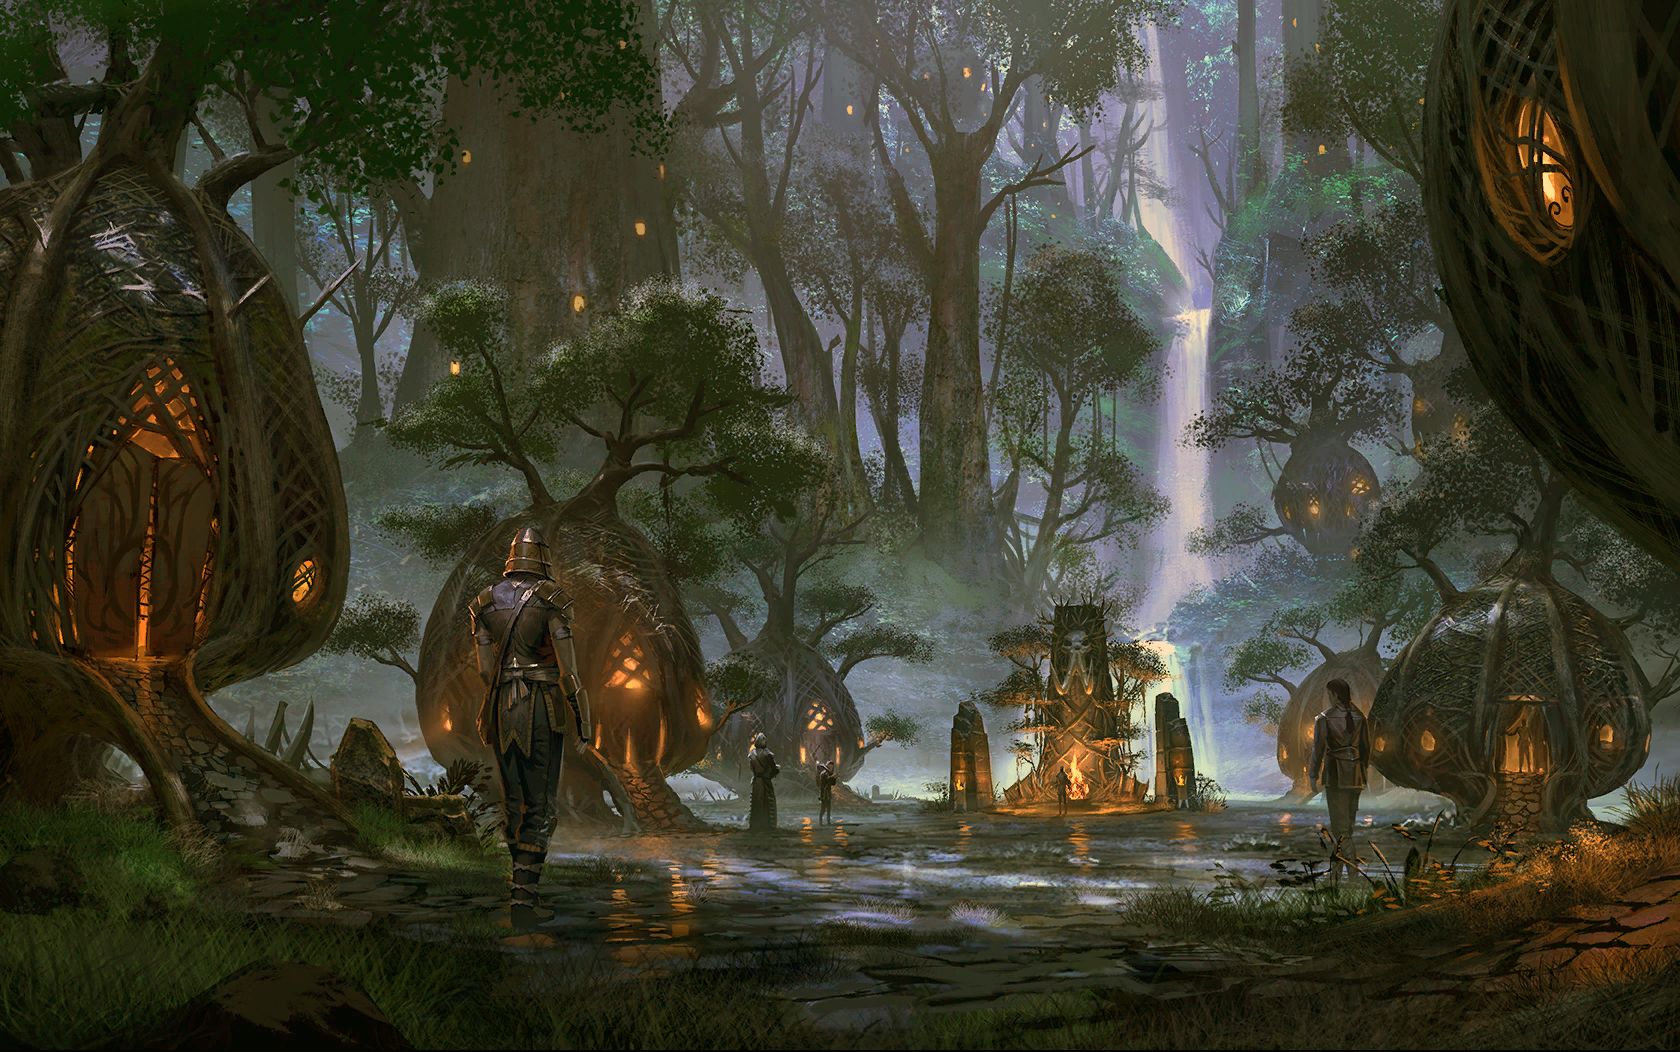 The ESO Tavern Makes Its Triumphant Return—Sign up Now! - The Elder Scrolls  Online